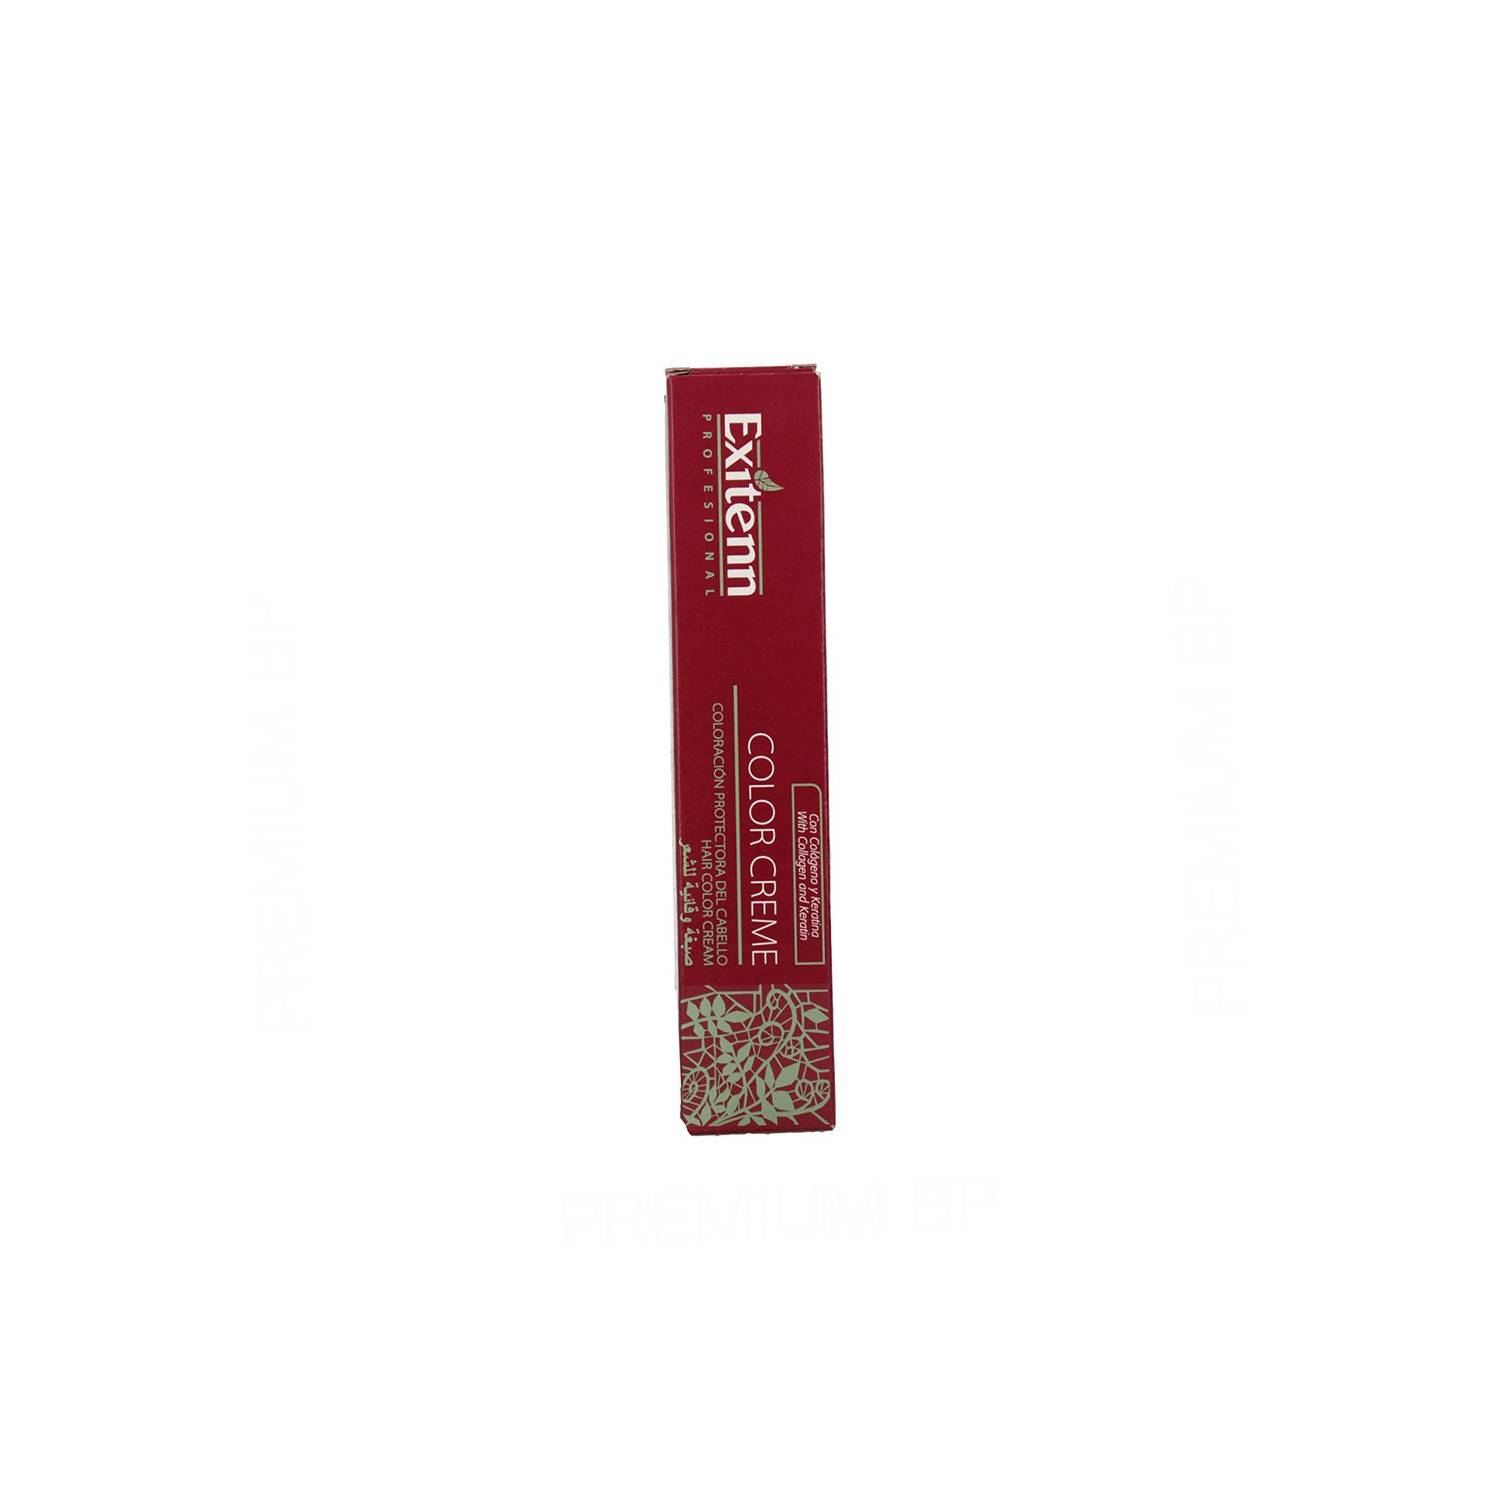 Exitenn Color Creme 60ml, Color 8.9 Tabaco Clear (89)